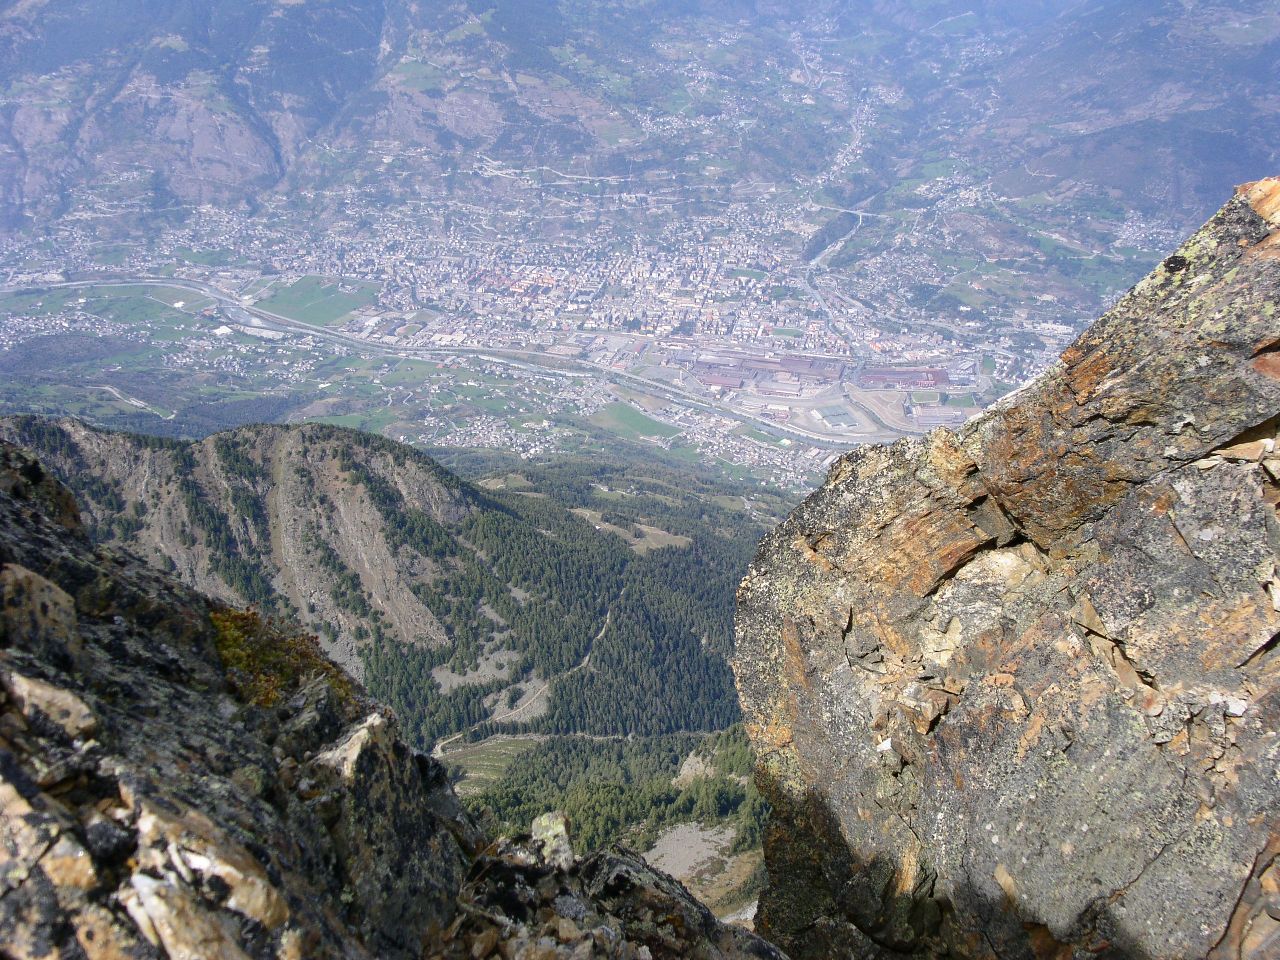 View of Aosta from the top